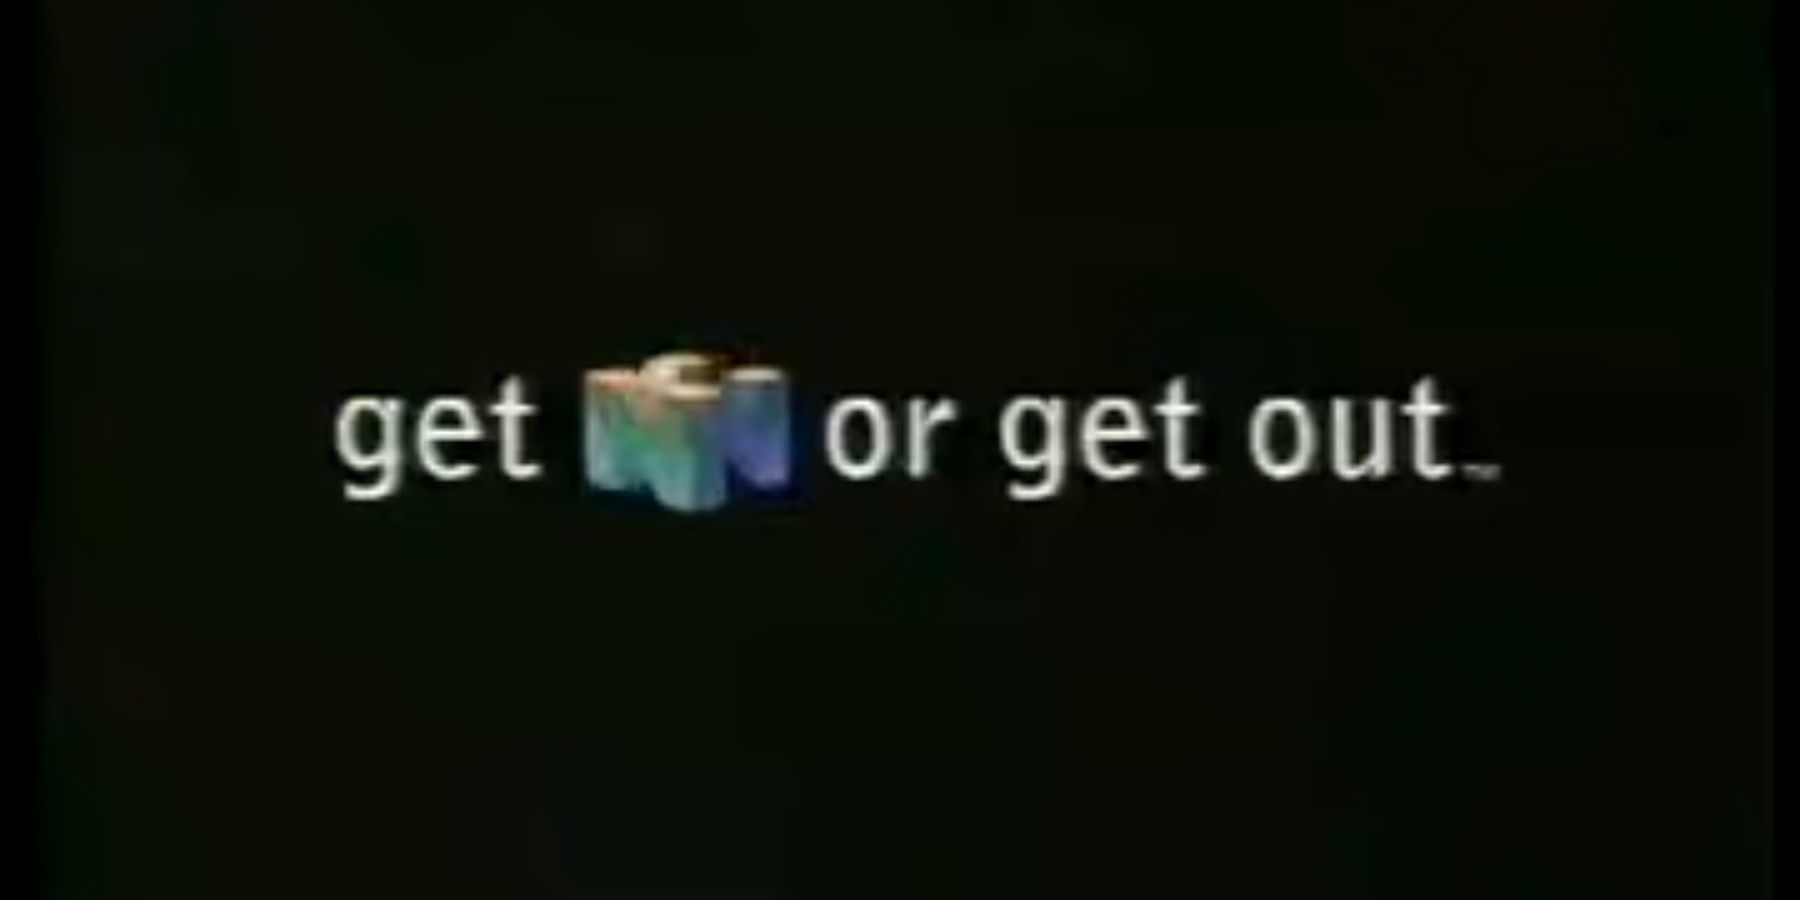 get n or get out n64 commercial featured